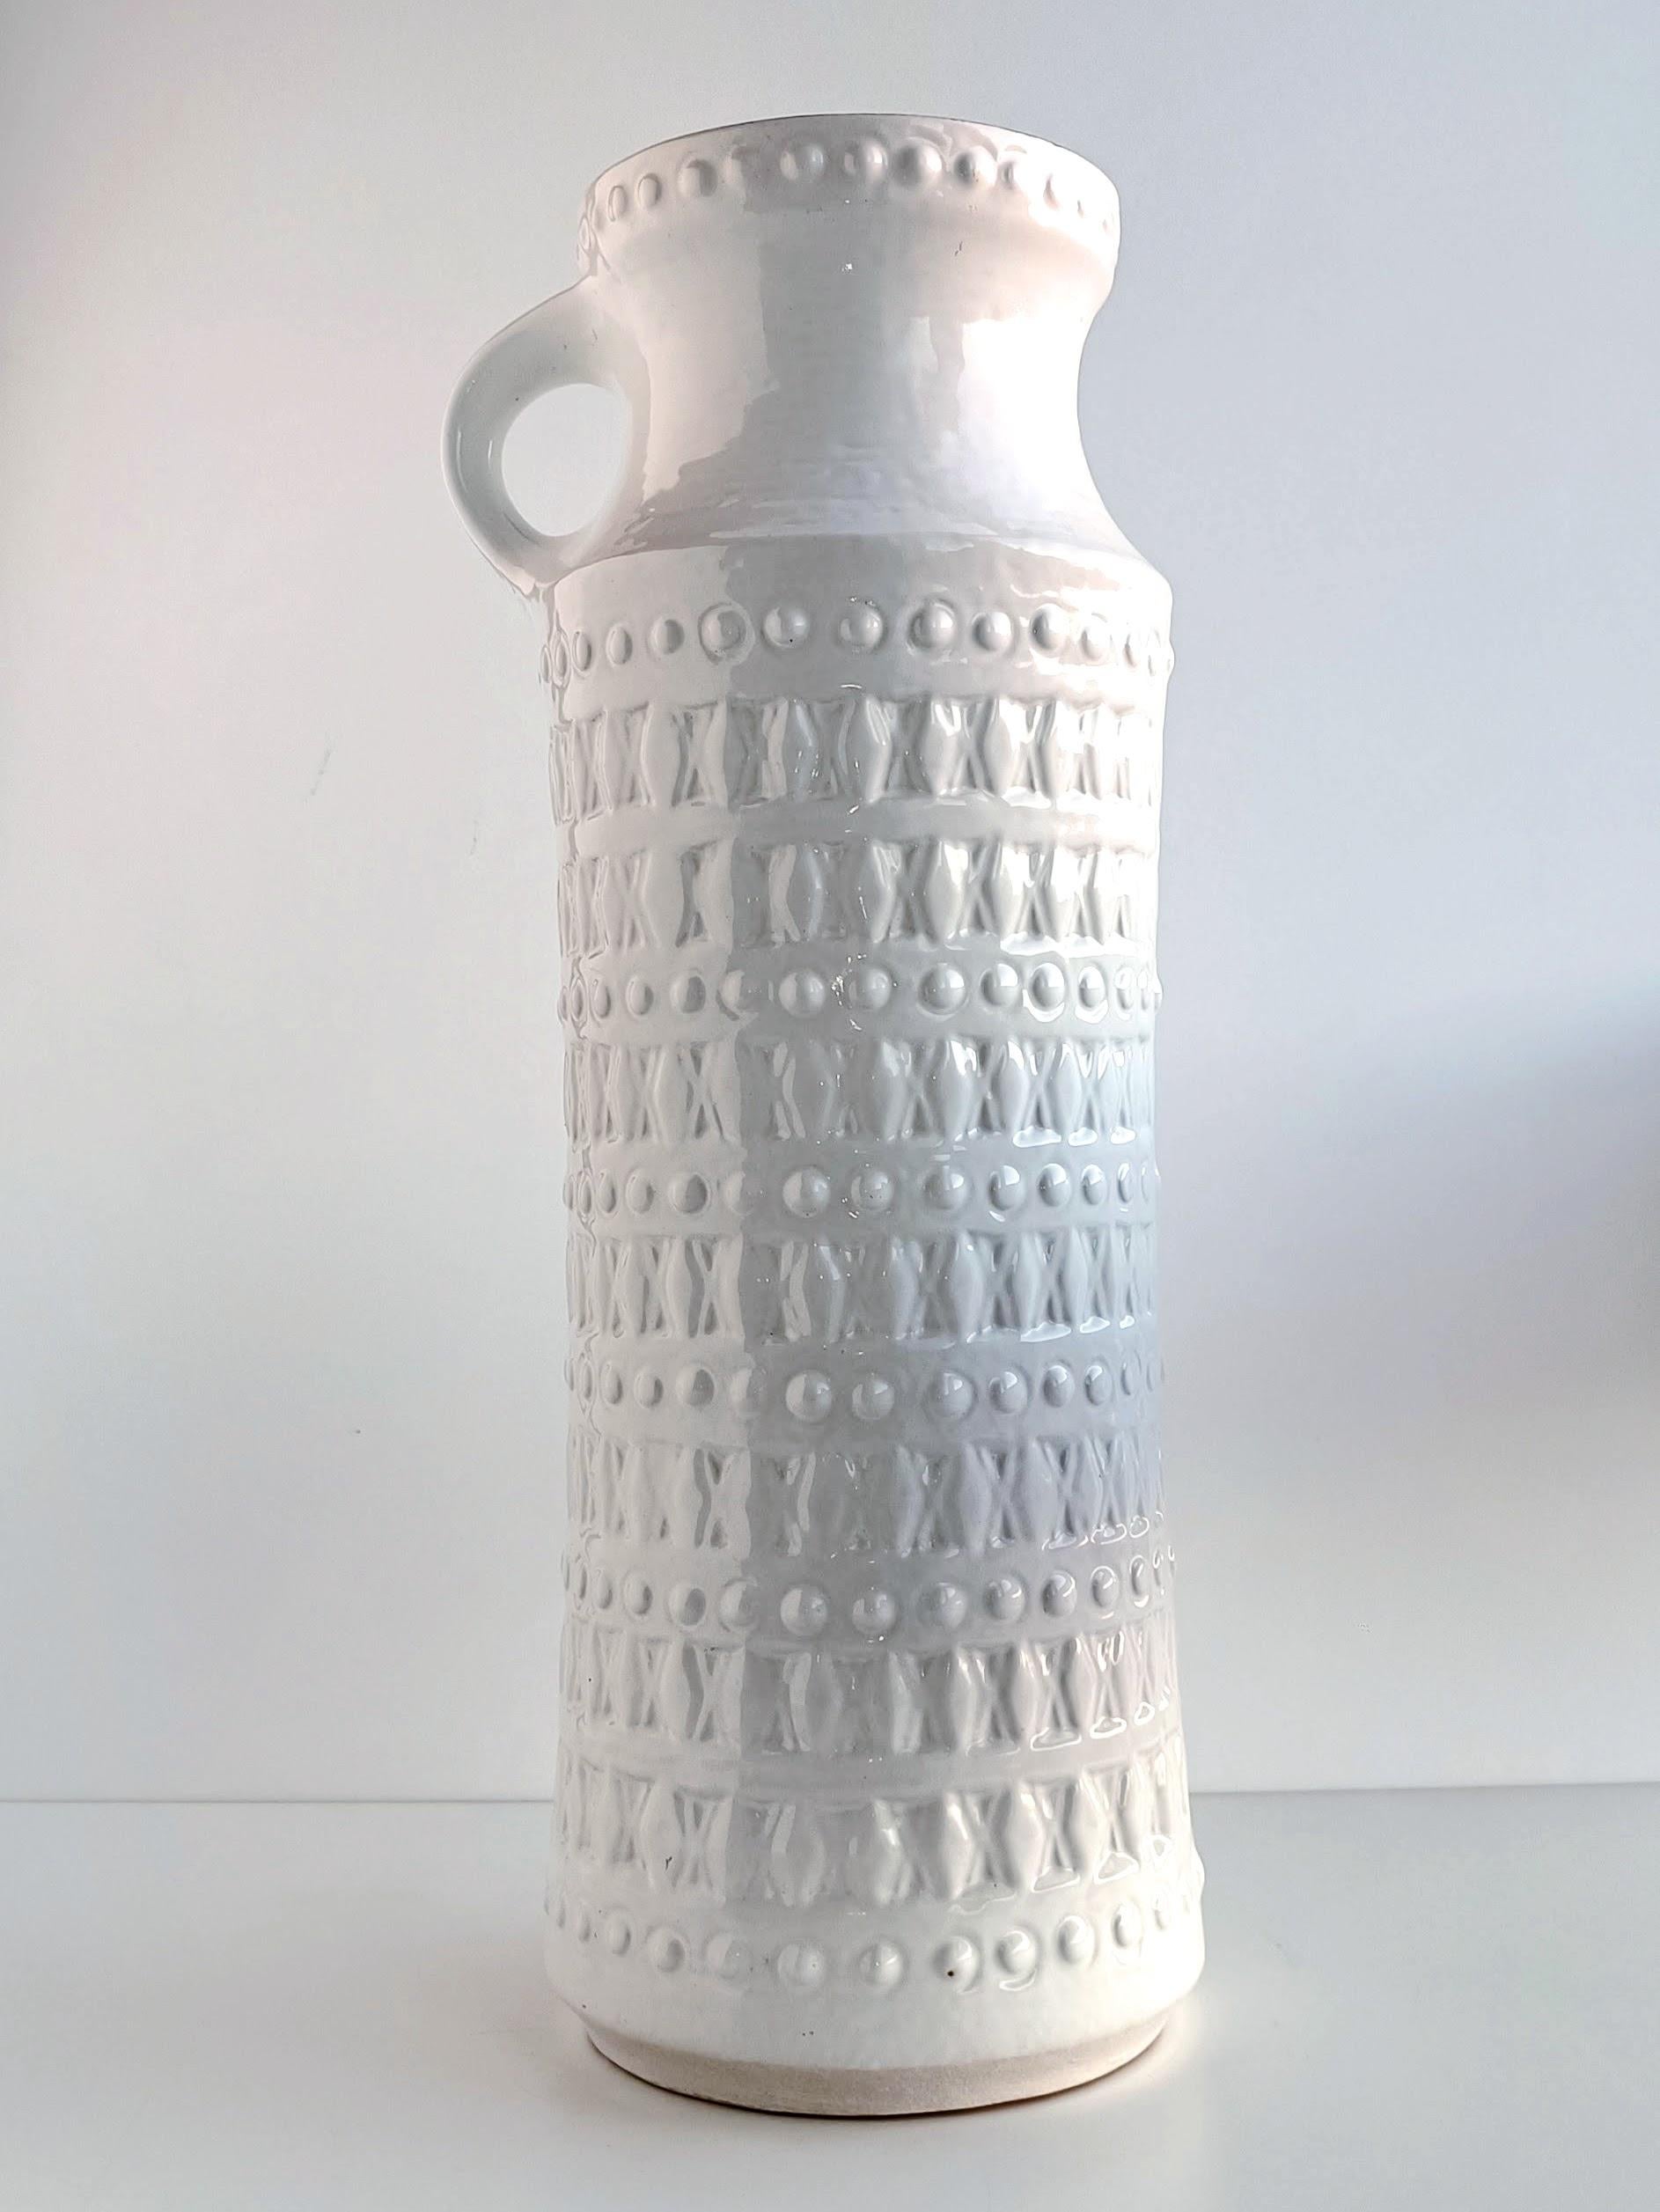 Vintage West Germany white  glazing Carstens Tönnieshof extra large ceramic jug-vase. Signed and numbered: 7140-45. Produced in West Germany circa the 1960s. 

Discover the beauty of West Germany Carstens Tonnieshof vintage decor with this exquisite